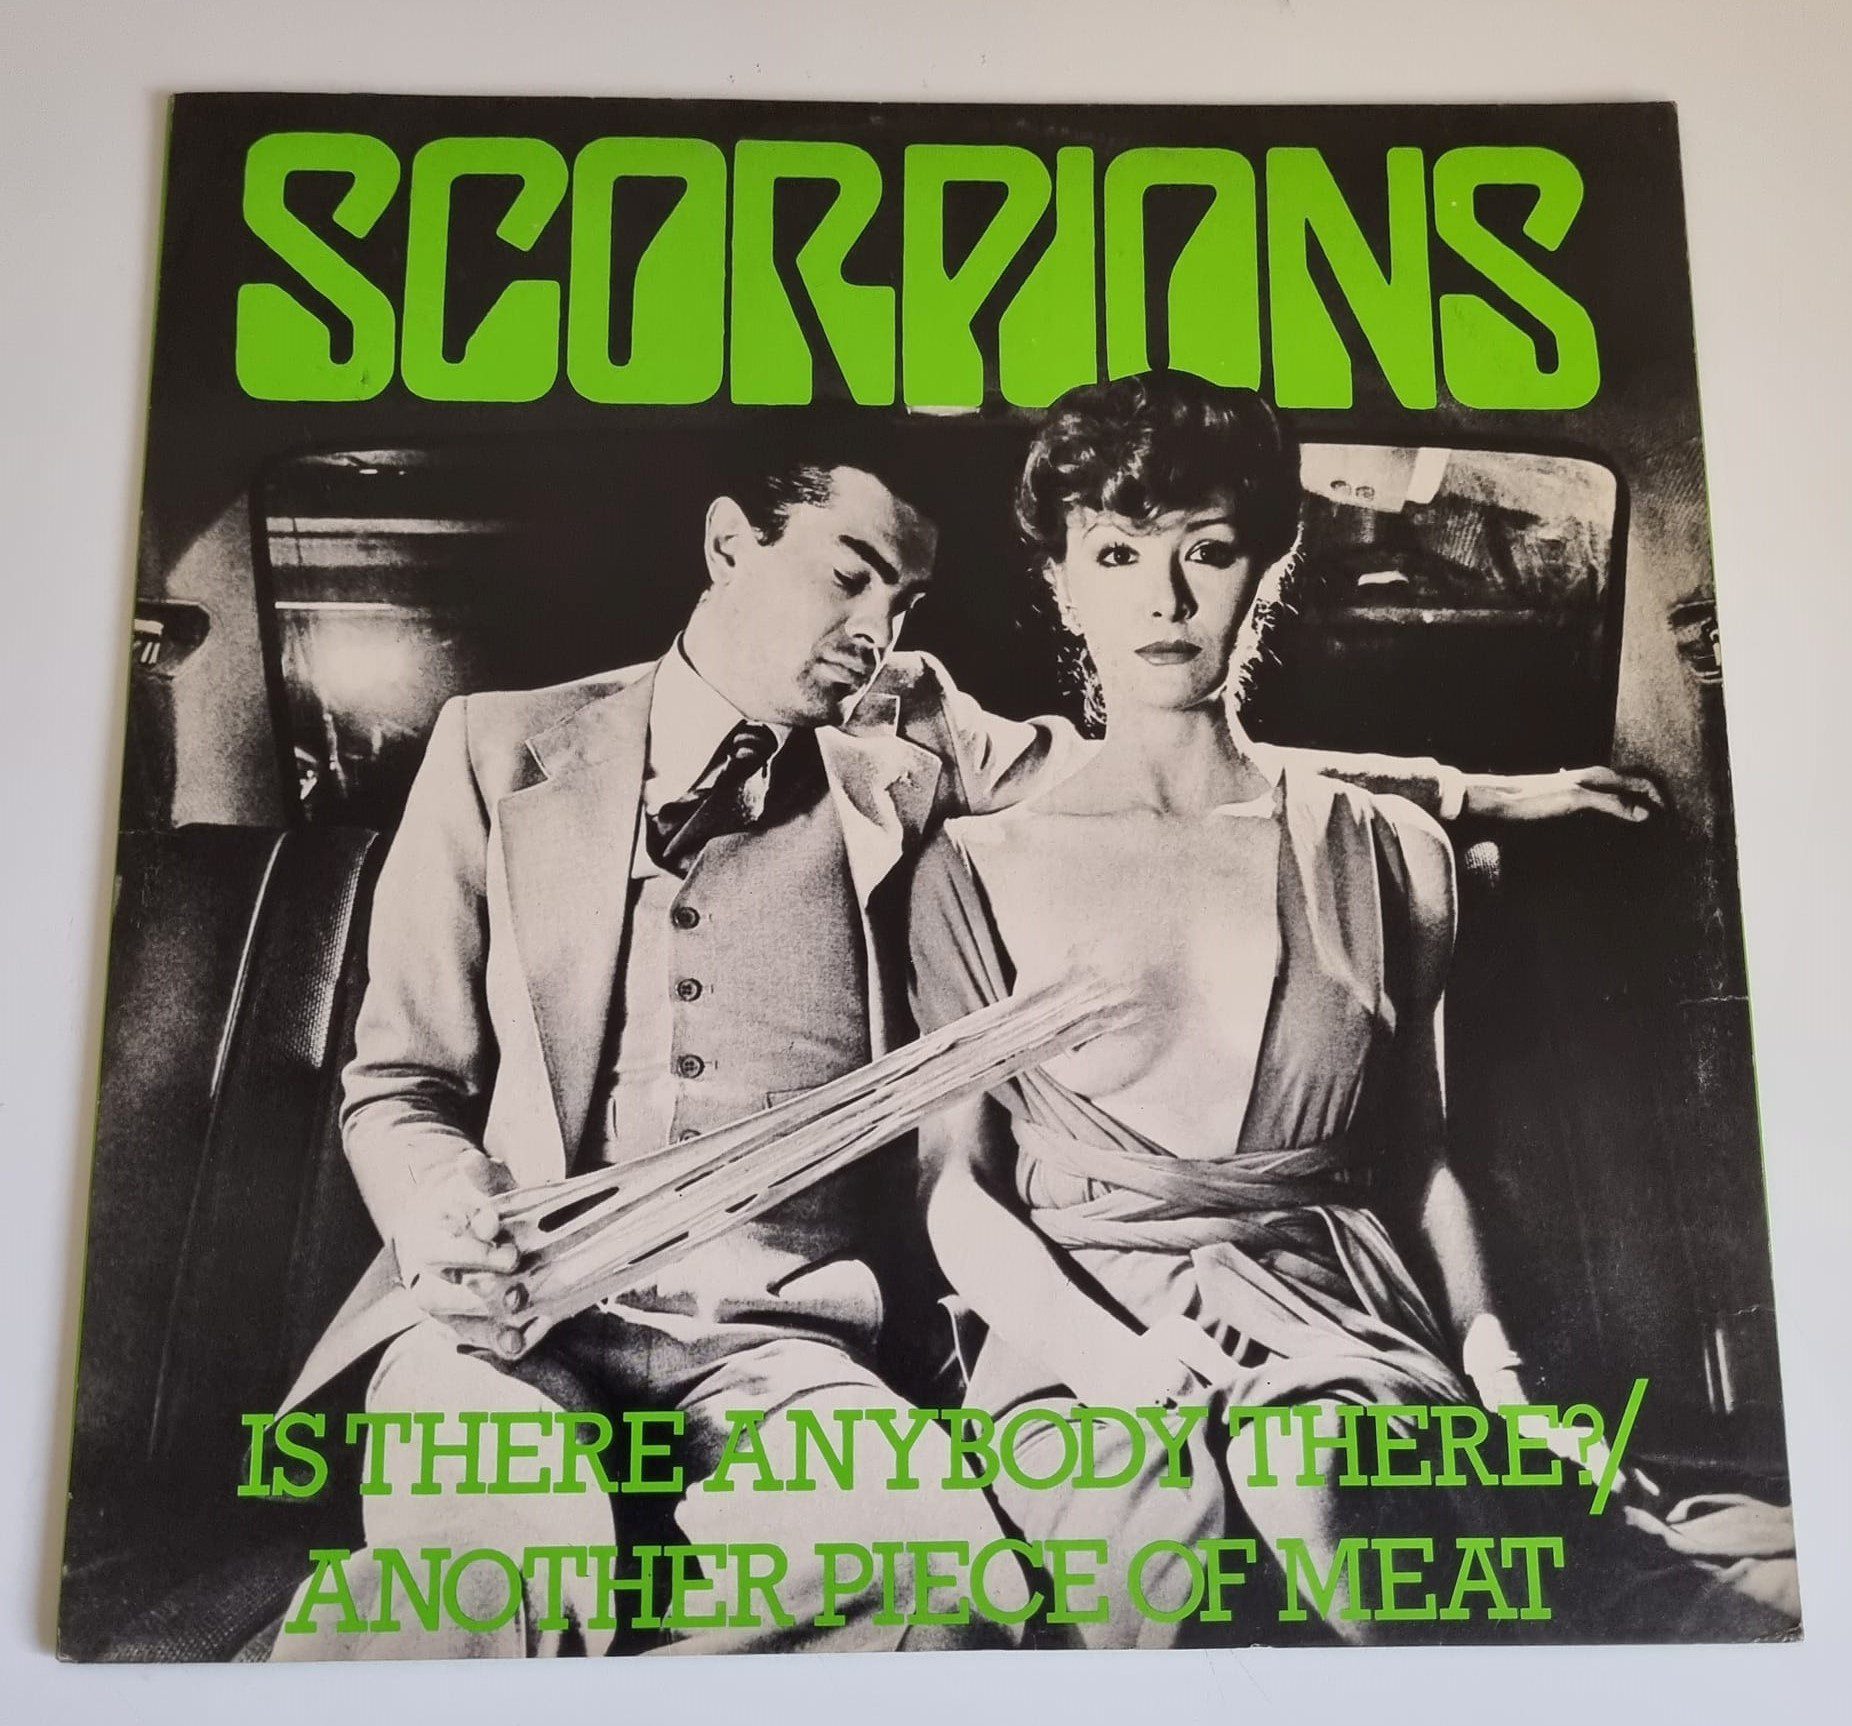 Buy this rare Scorpions record by clicking here